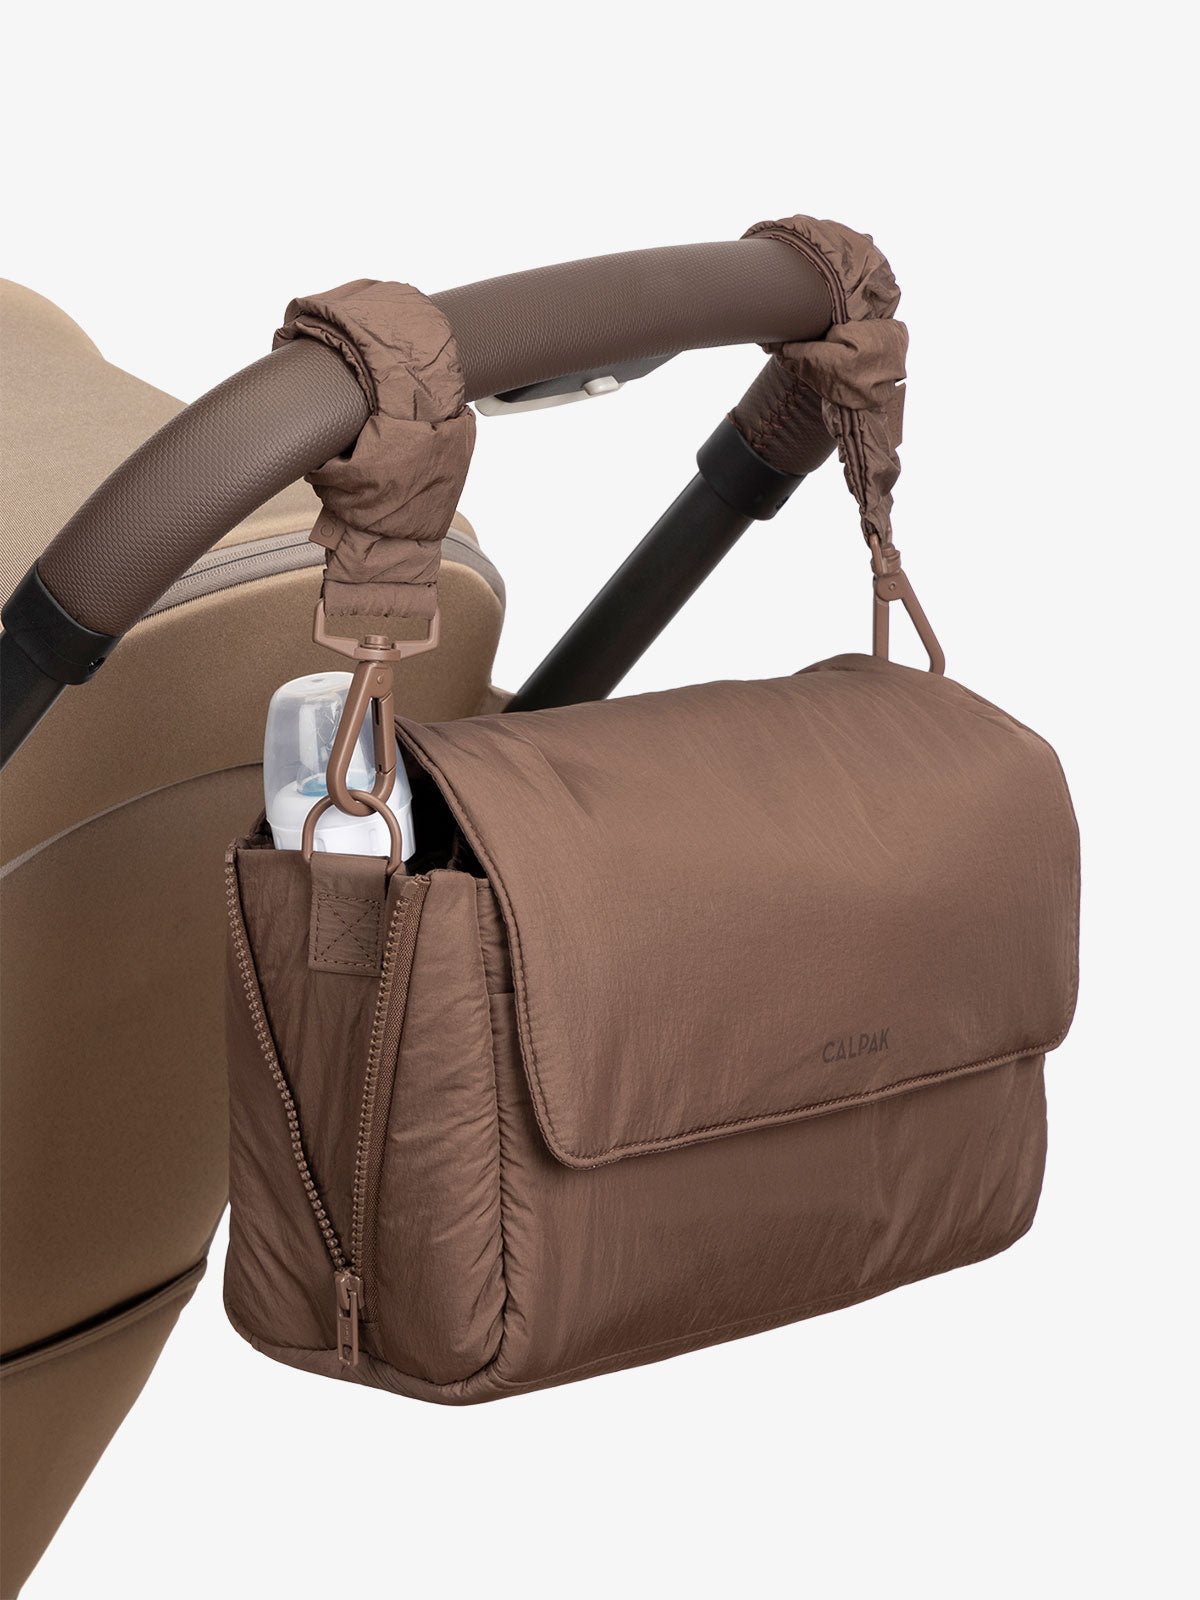 CALPAK Convertible Stroller Caddy Crossbody with included stroller straps in hazelnut brown